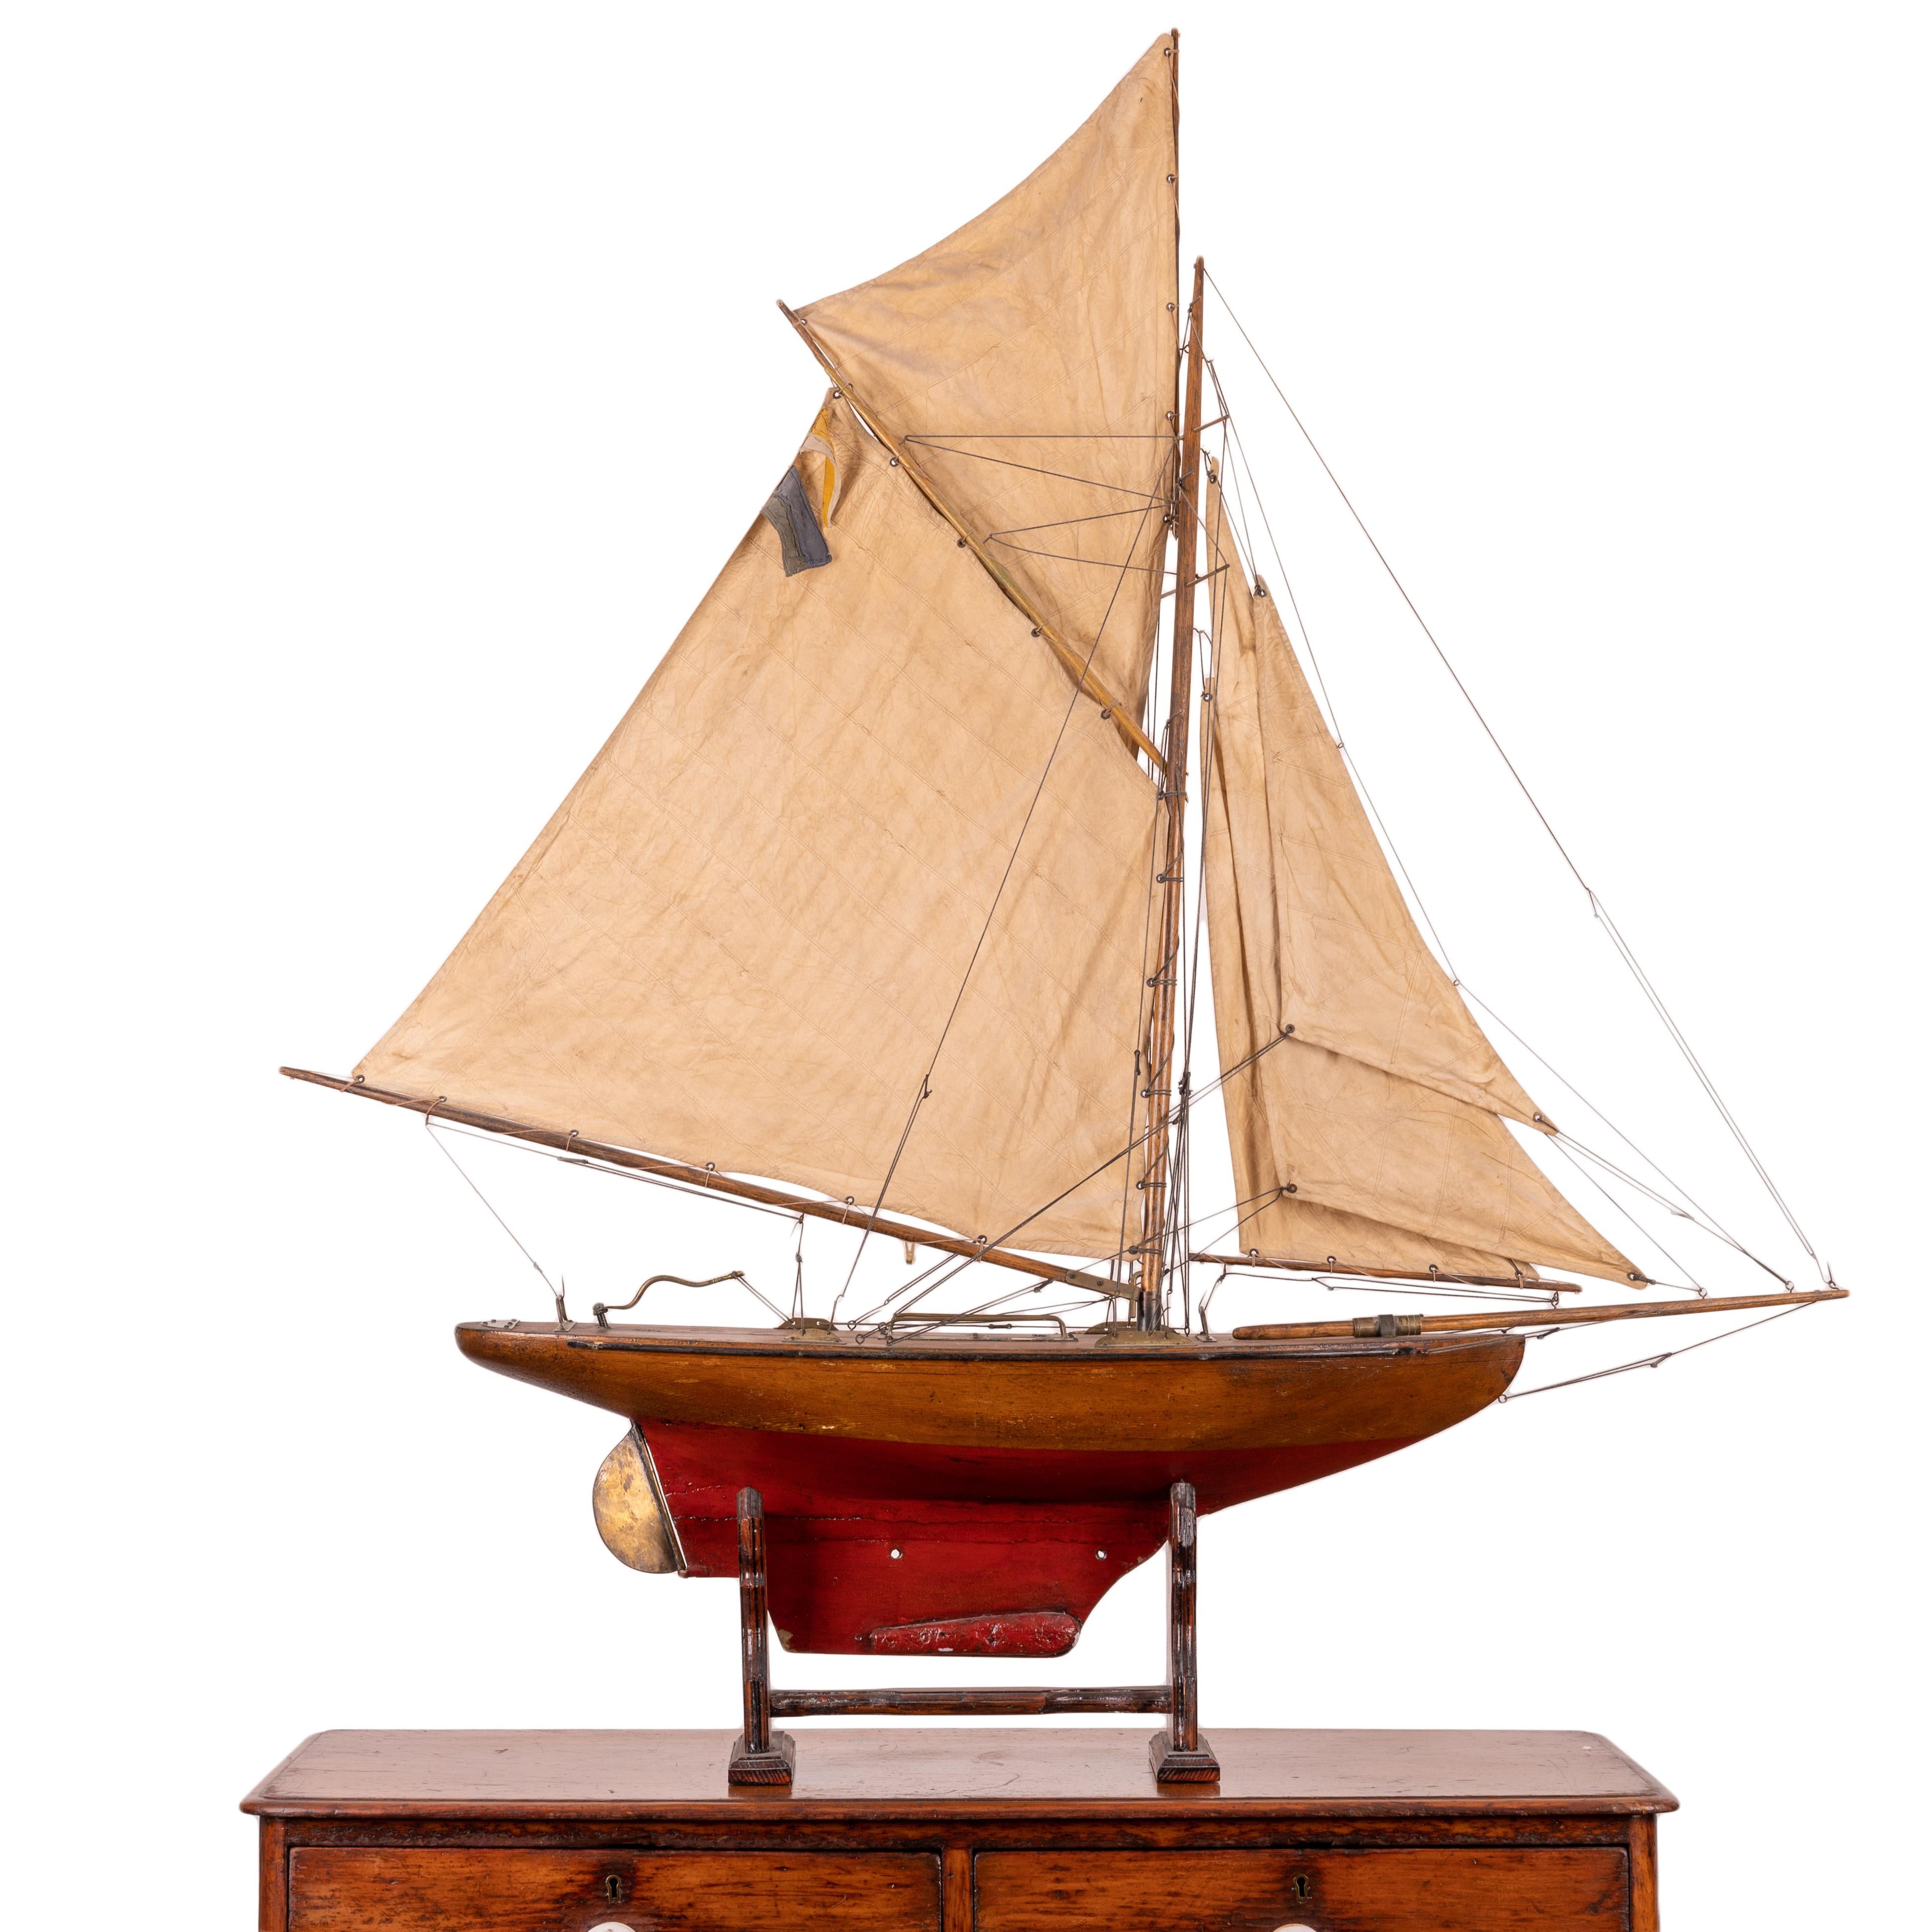 A fully rigged pond yacht on display stand, 1910s.

All original paint, riggings and five sails.

49 ½ inches wide by 8 ½ inches wide by 53 inches tall